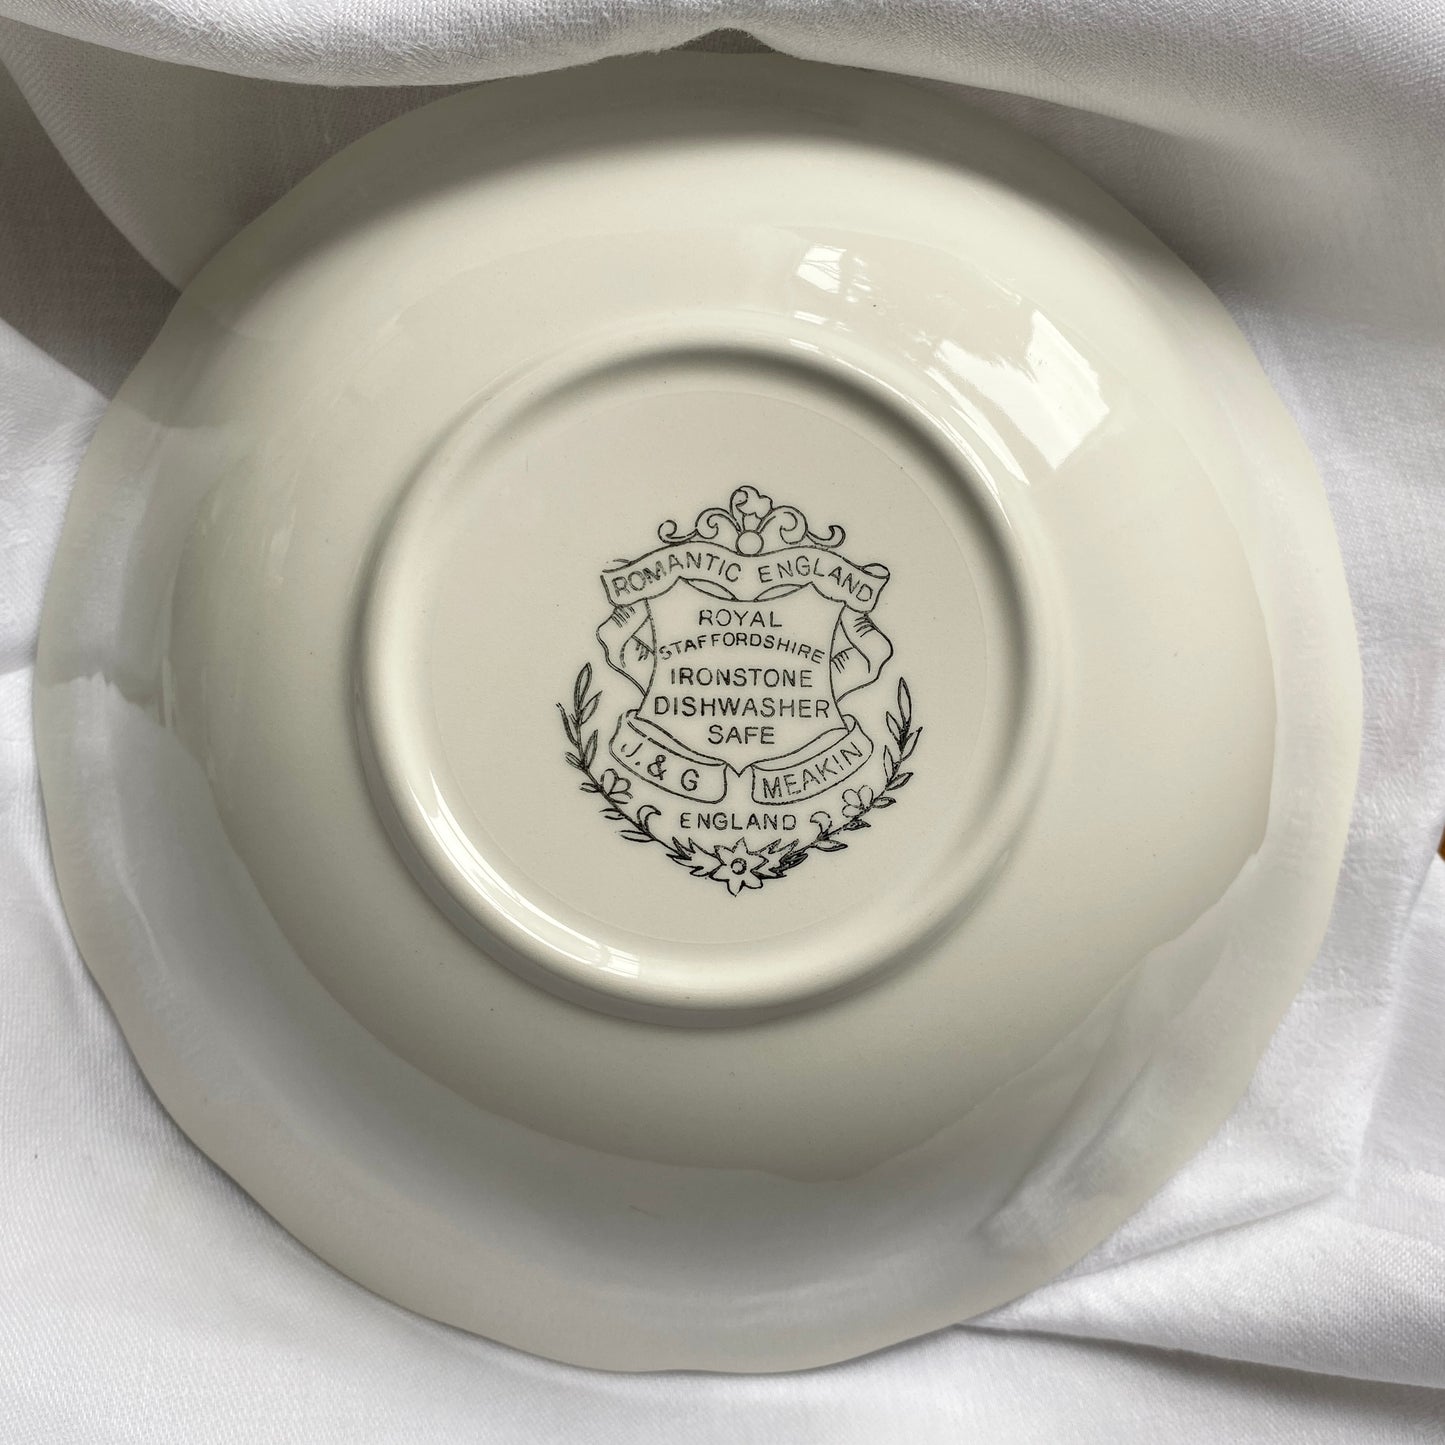 Romantic England Ironstone Dishes by J&G Meakin / Royal Staffordshire